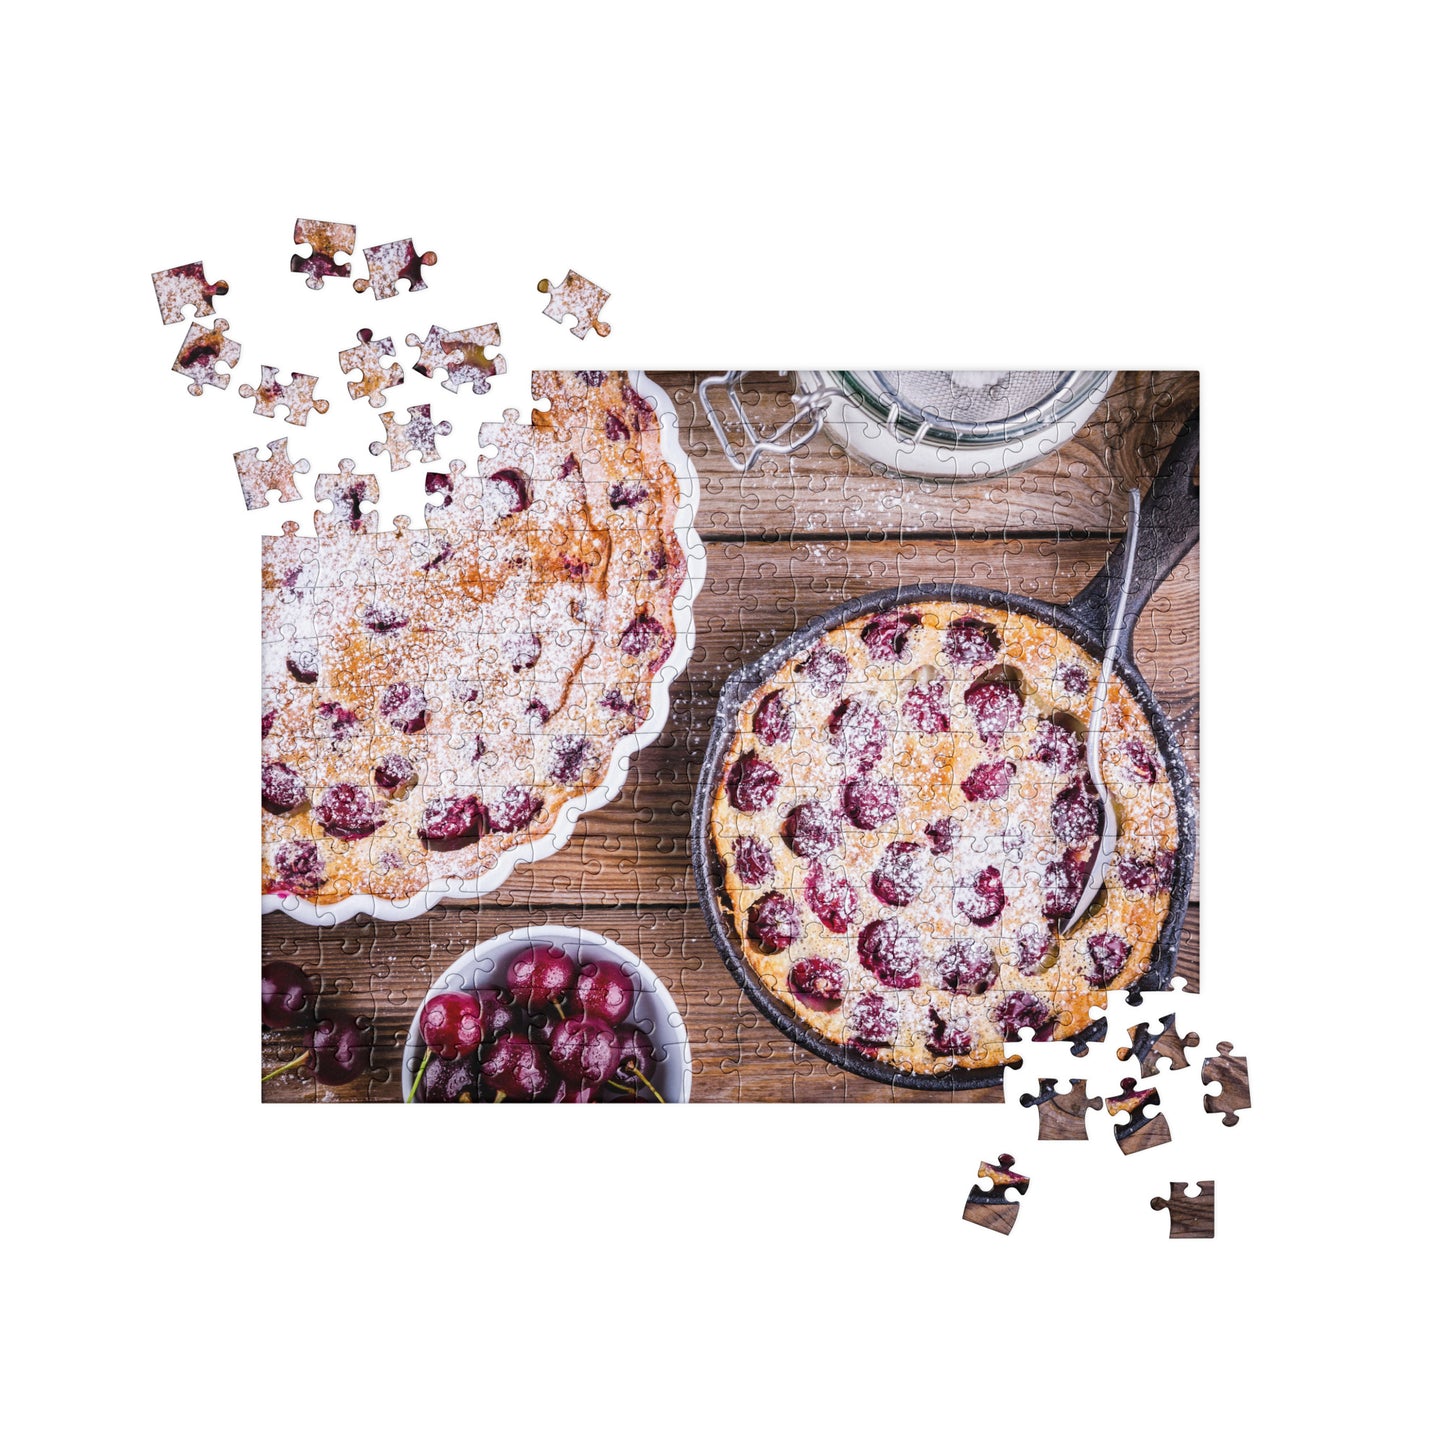 Food Fare Jigsaw Puzzle: Cherry Bake with Powdered Sugar